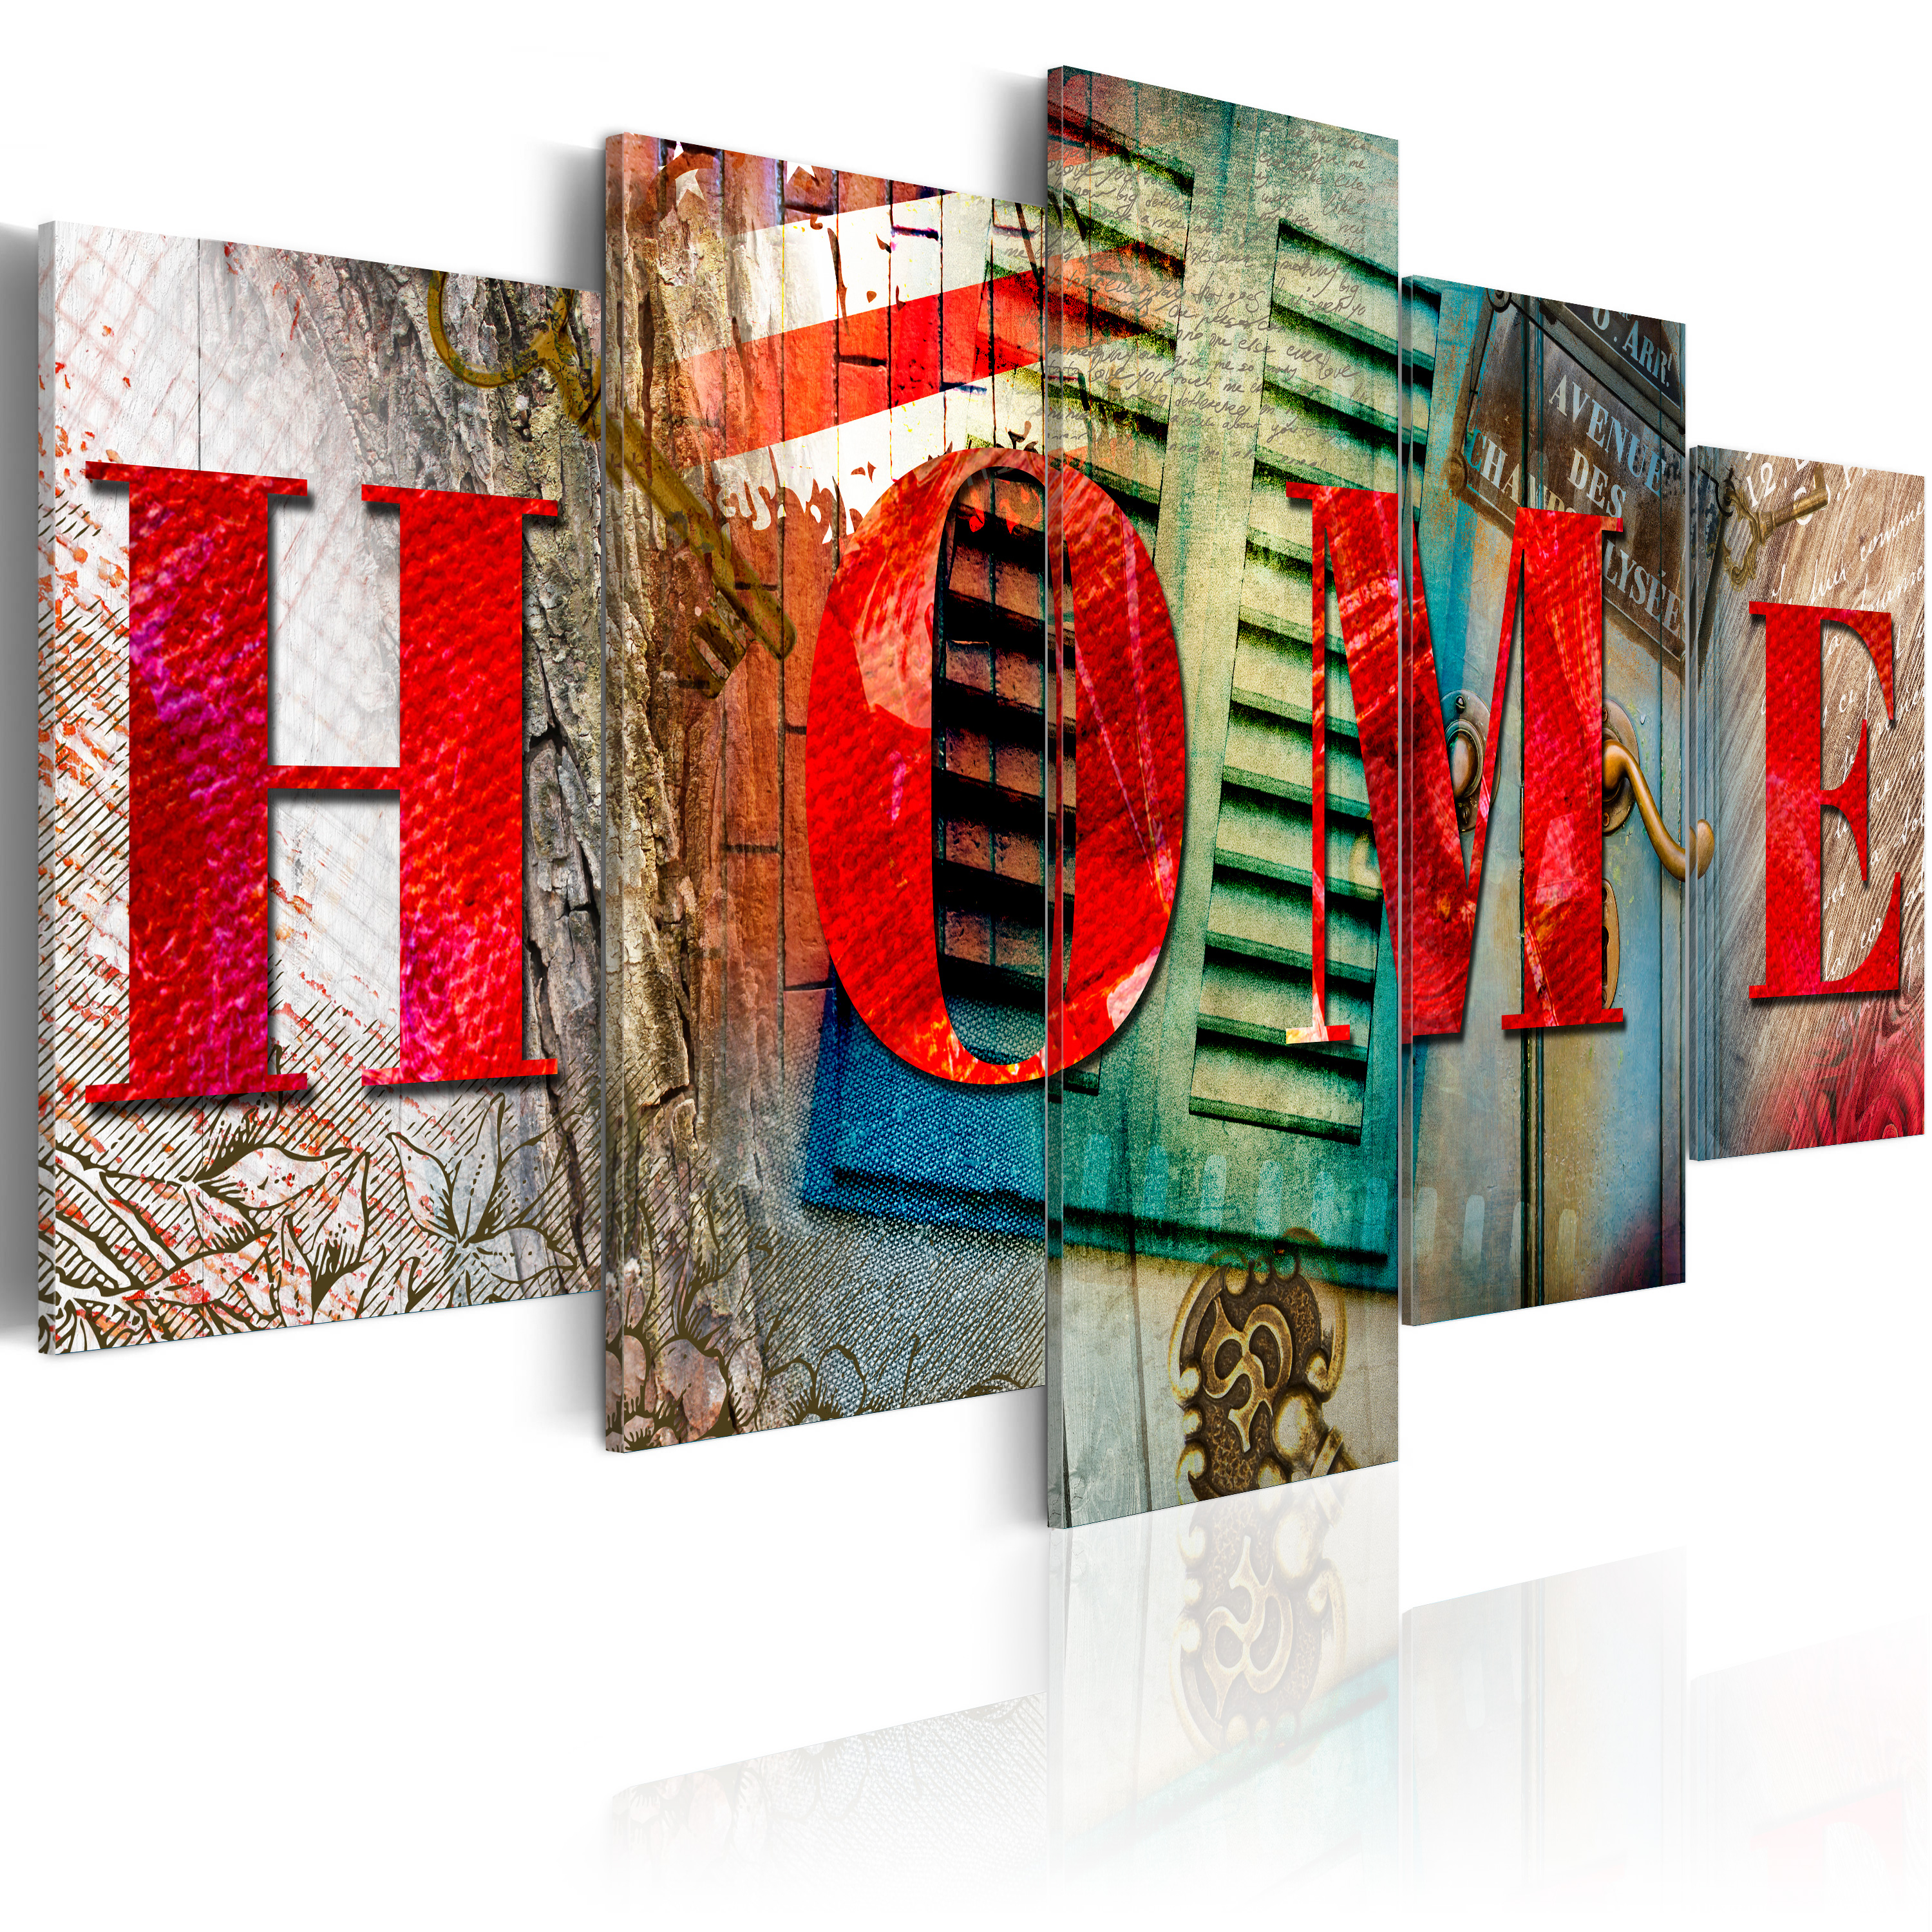 Canvas Print - Elements of home - 200x100